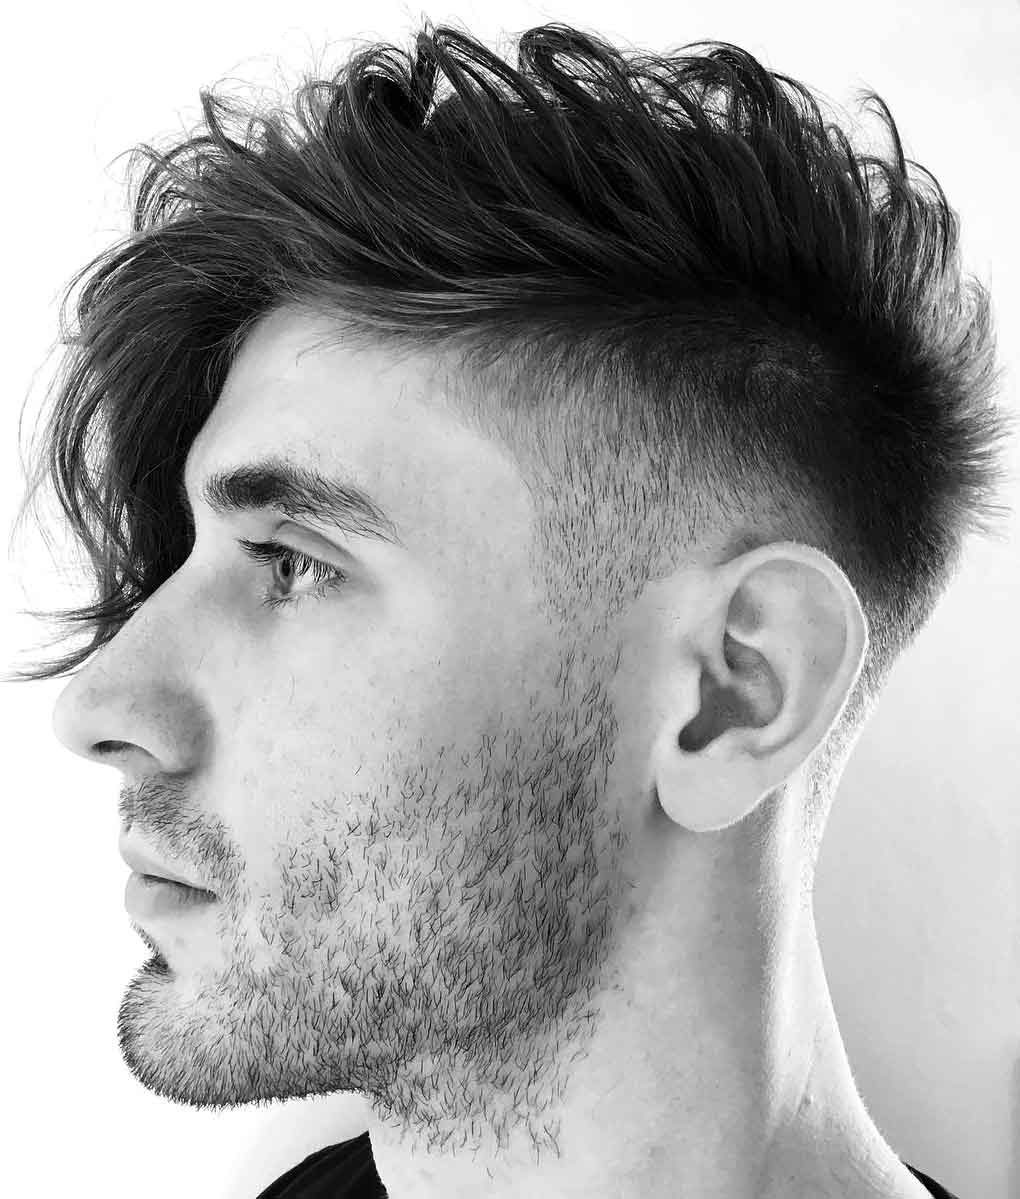 31 Incredible Bangs Hairstyles for Men to Copy in 2023